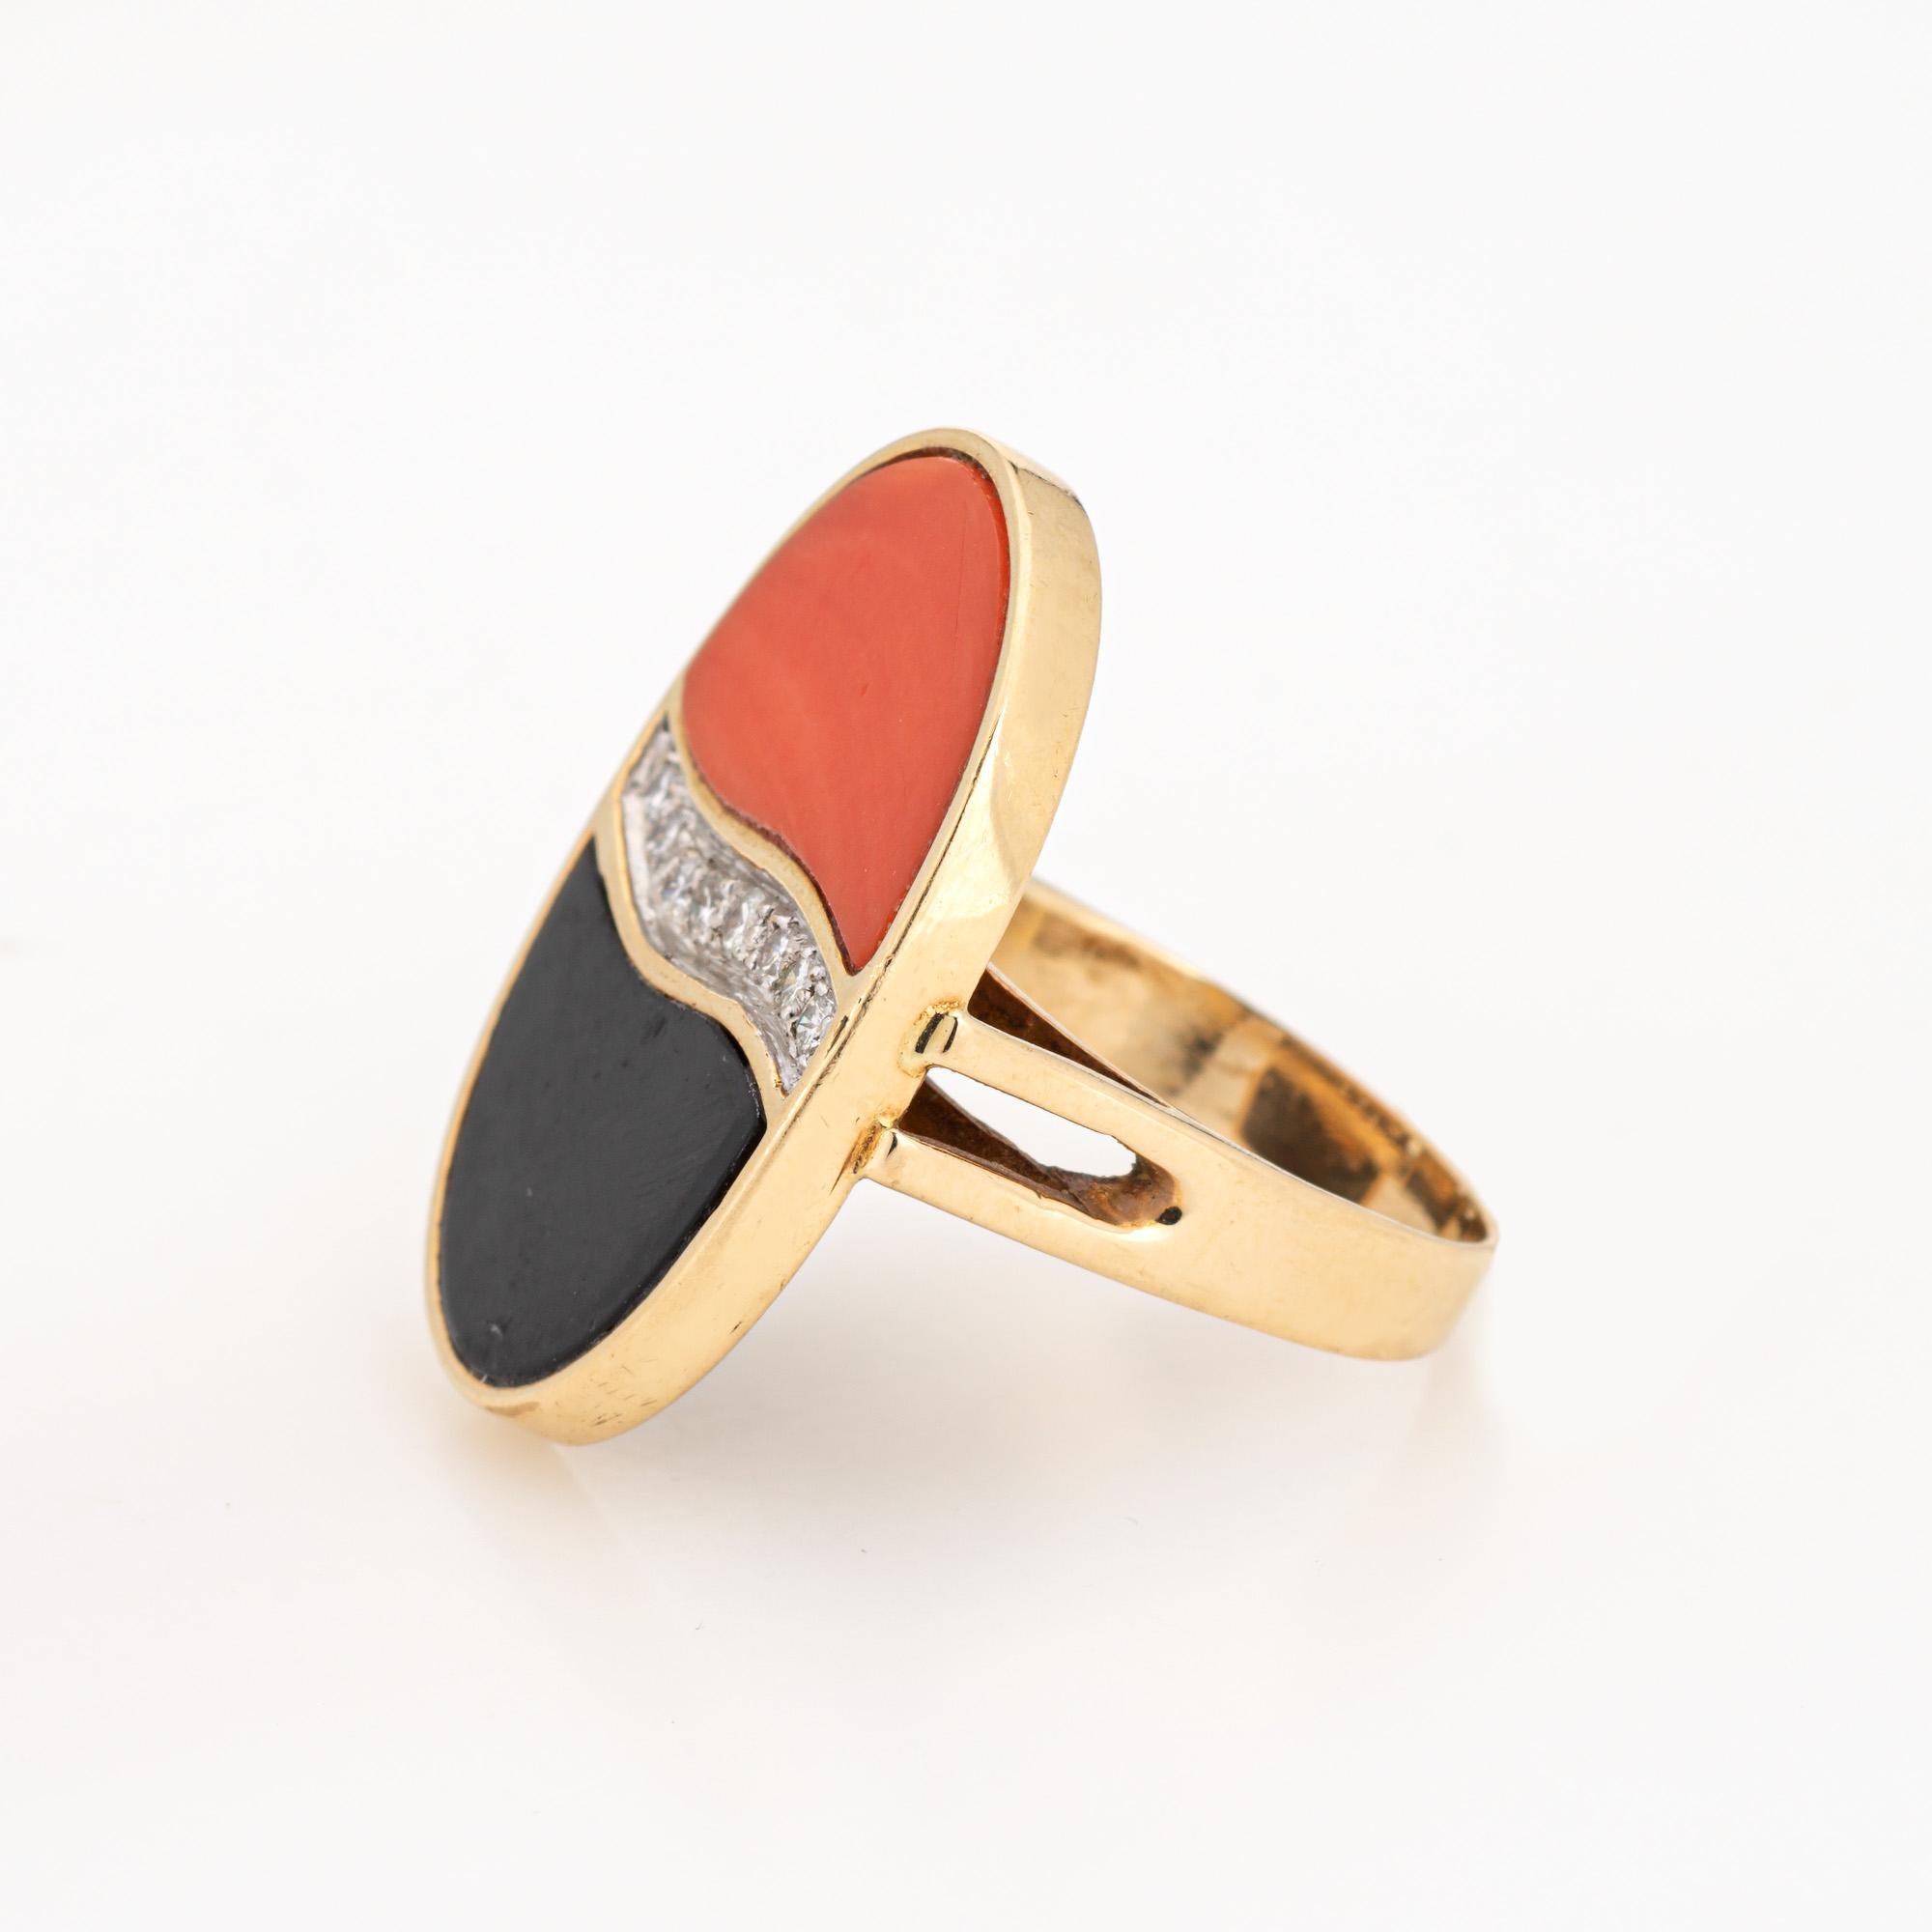 Cabochon 70s Coral Onyx Diamond Ring Vintage 14k Yellow Gold Cocktail Jewelry Sz 5 For Sale